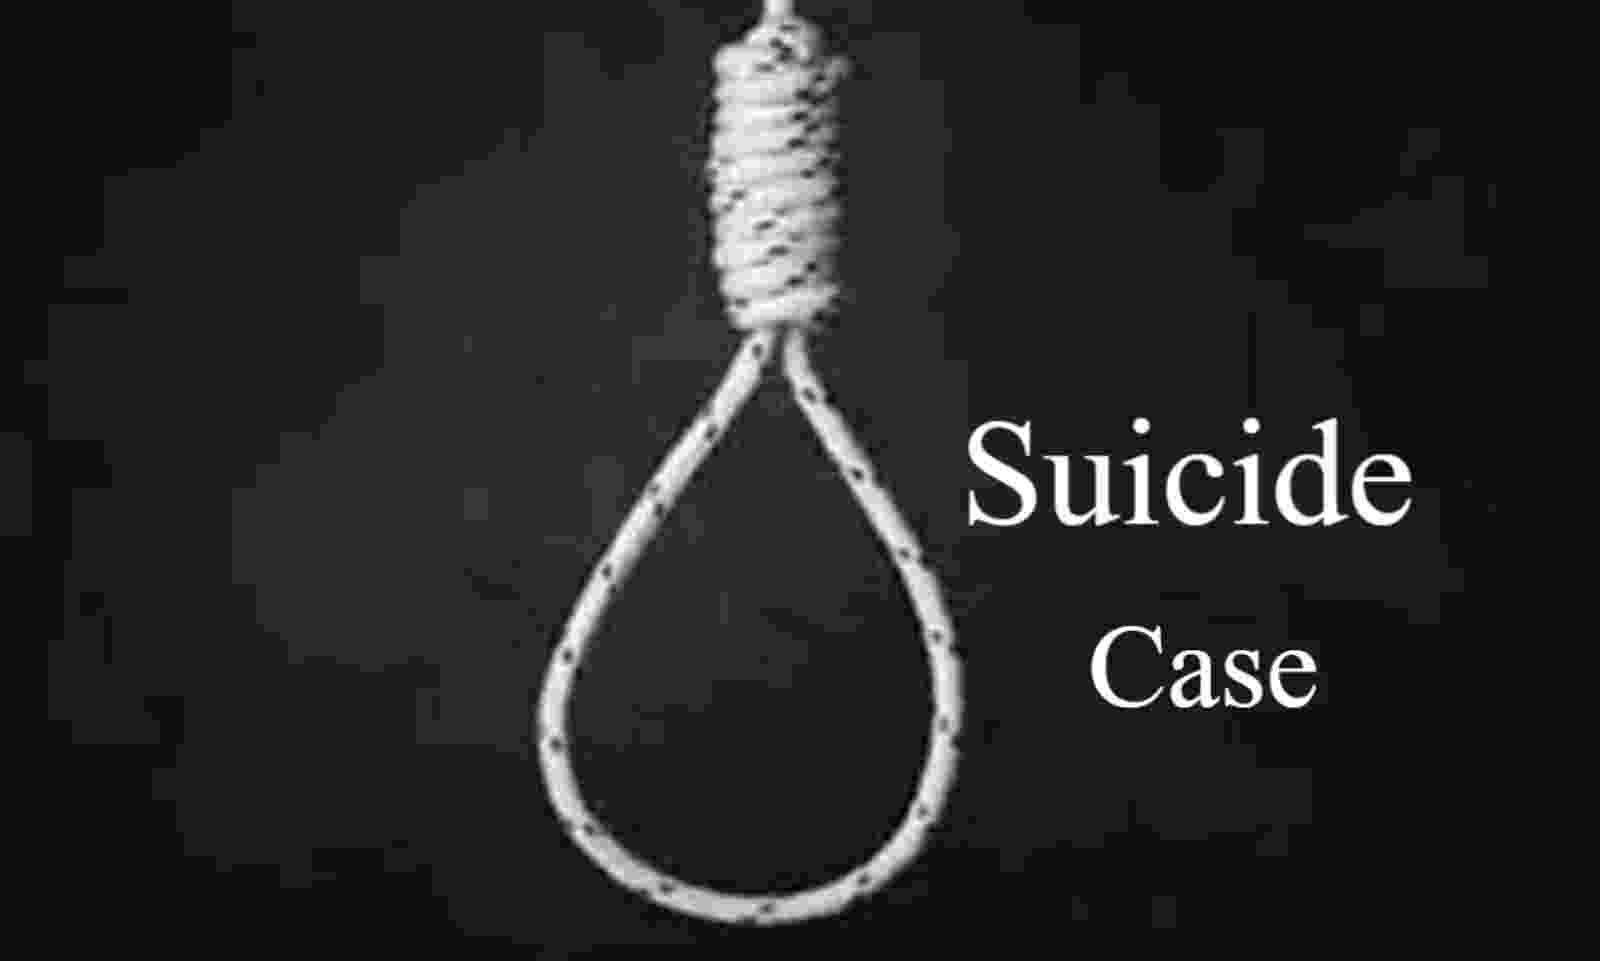 young man committed suicide by hanging himself from a tree in the field